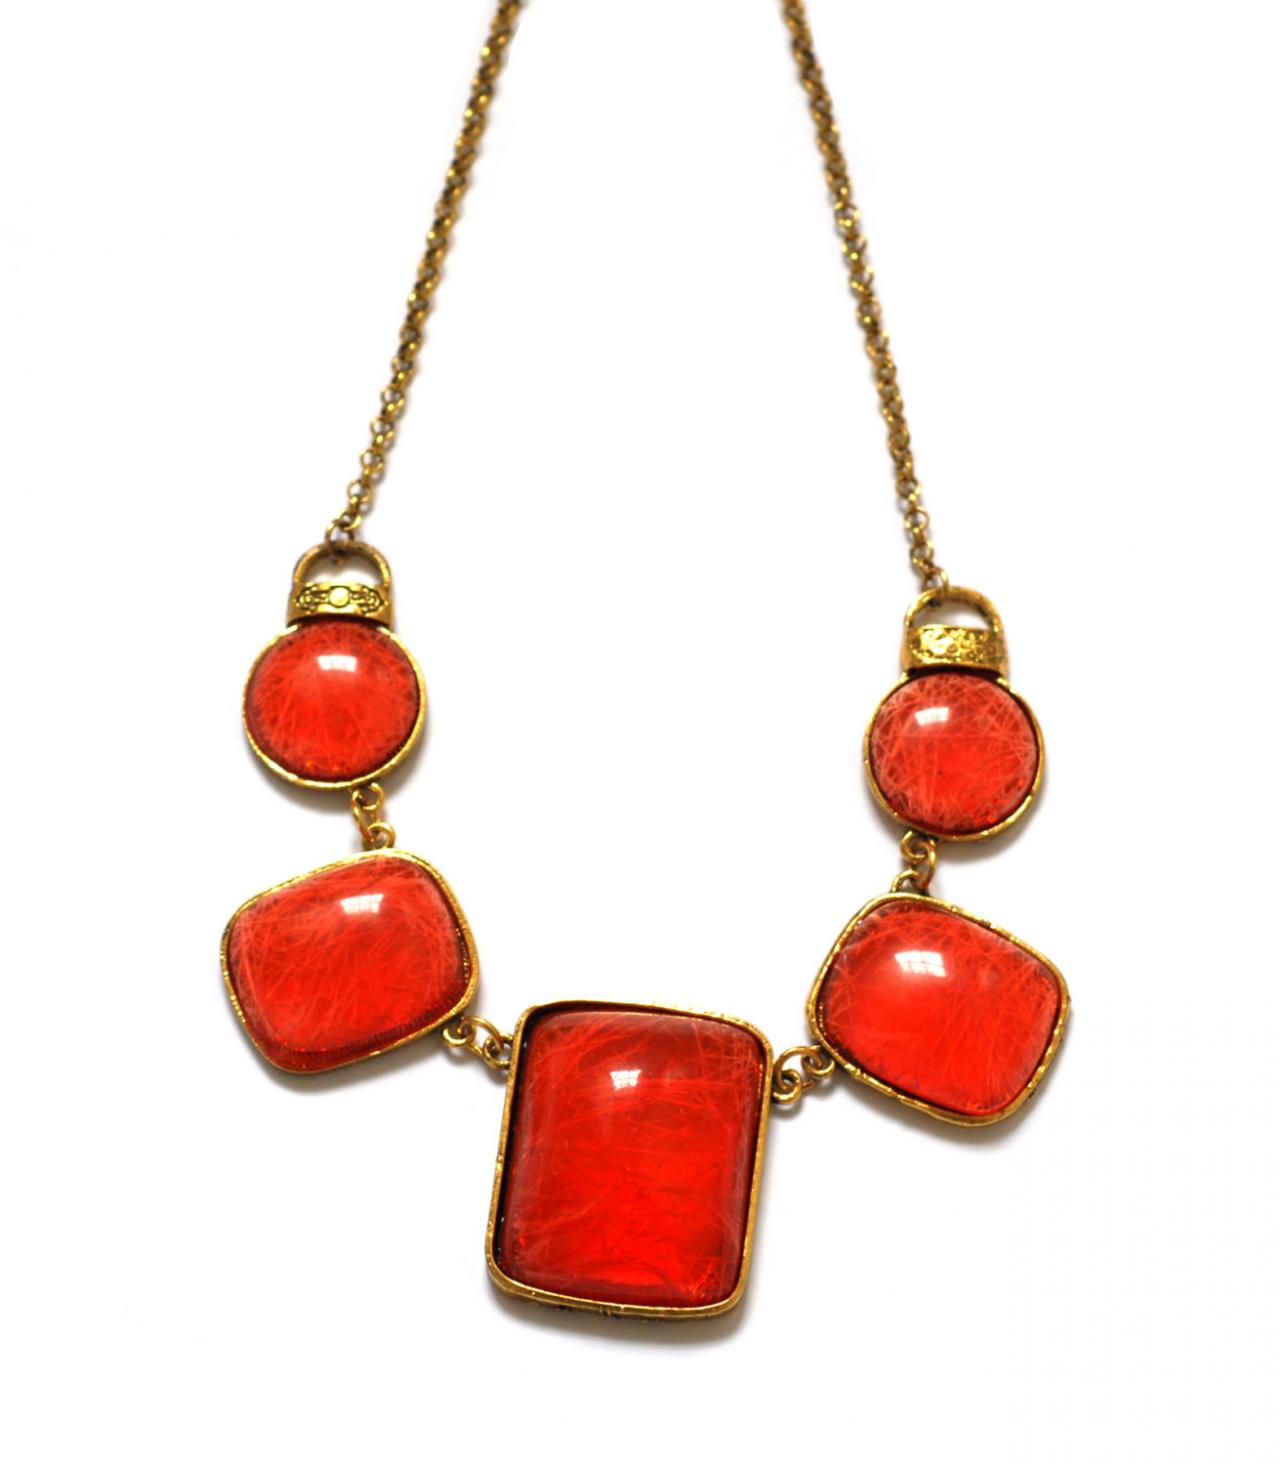 Red Statement Necklace, Emerald Bib Necklace, Prom Collar Necklace, Chunky Necklace